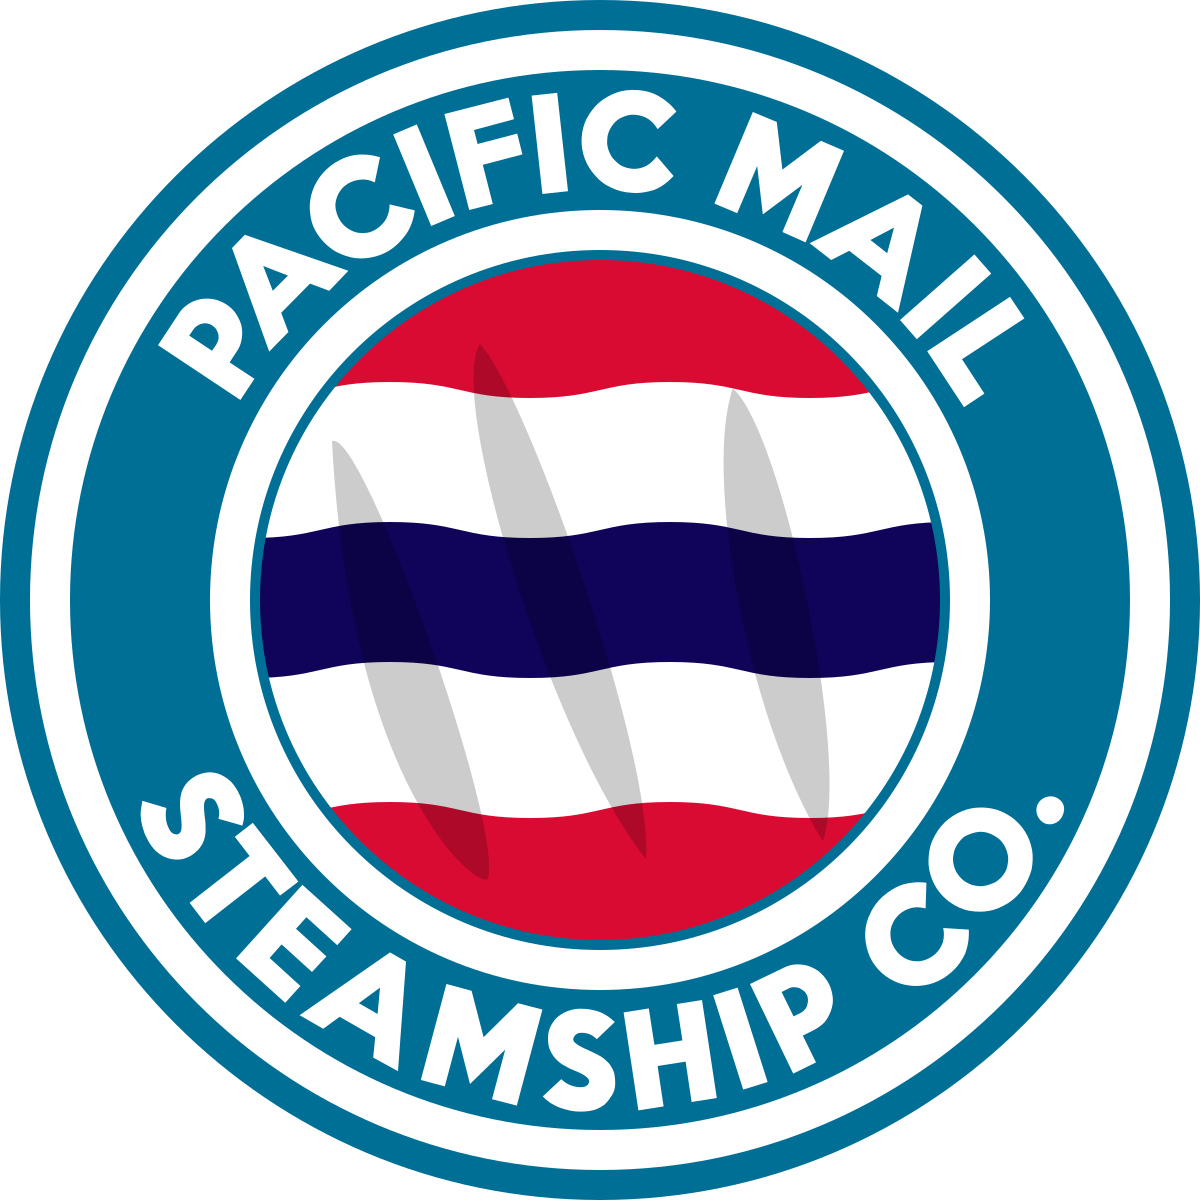 The Pacific Mail Steamship Co.'s logo. (Image: wikipedia)